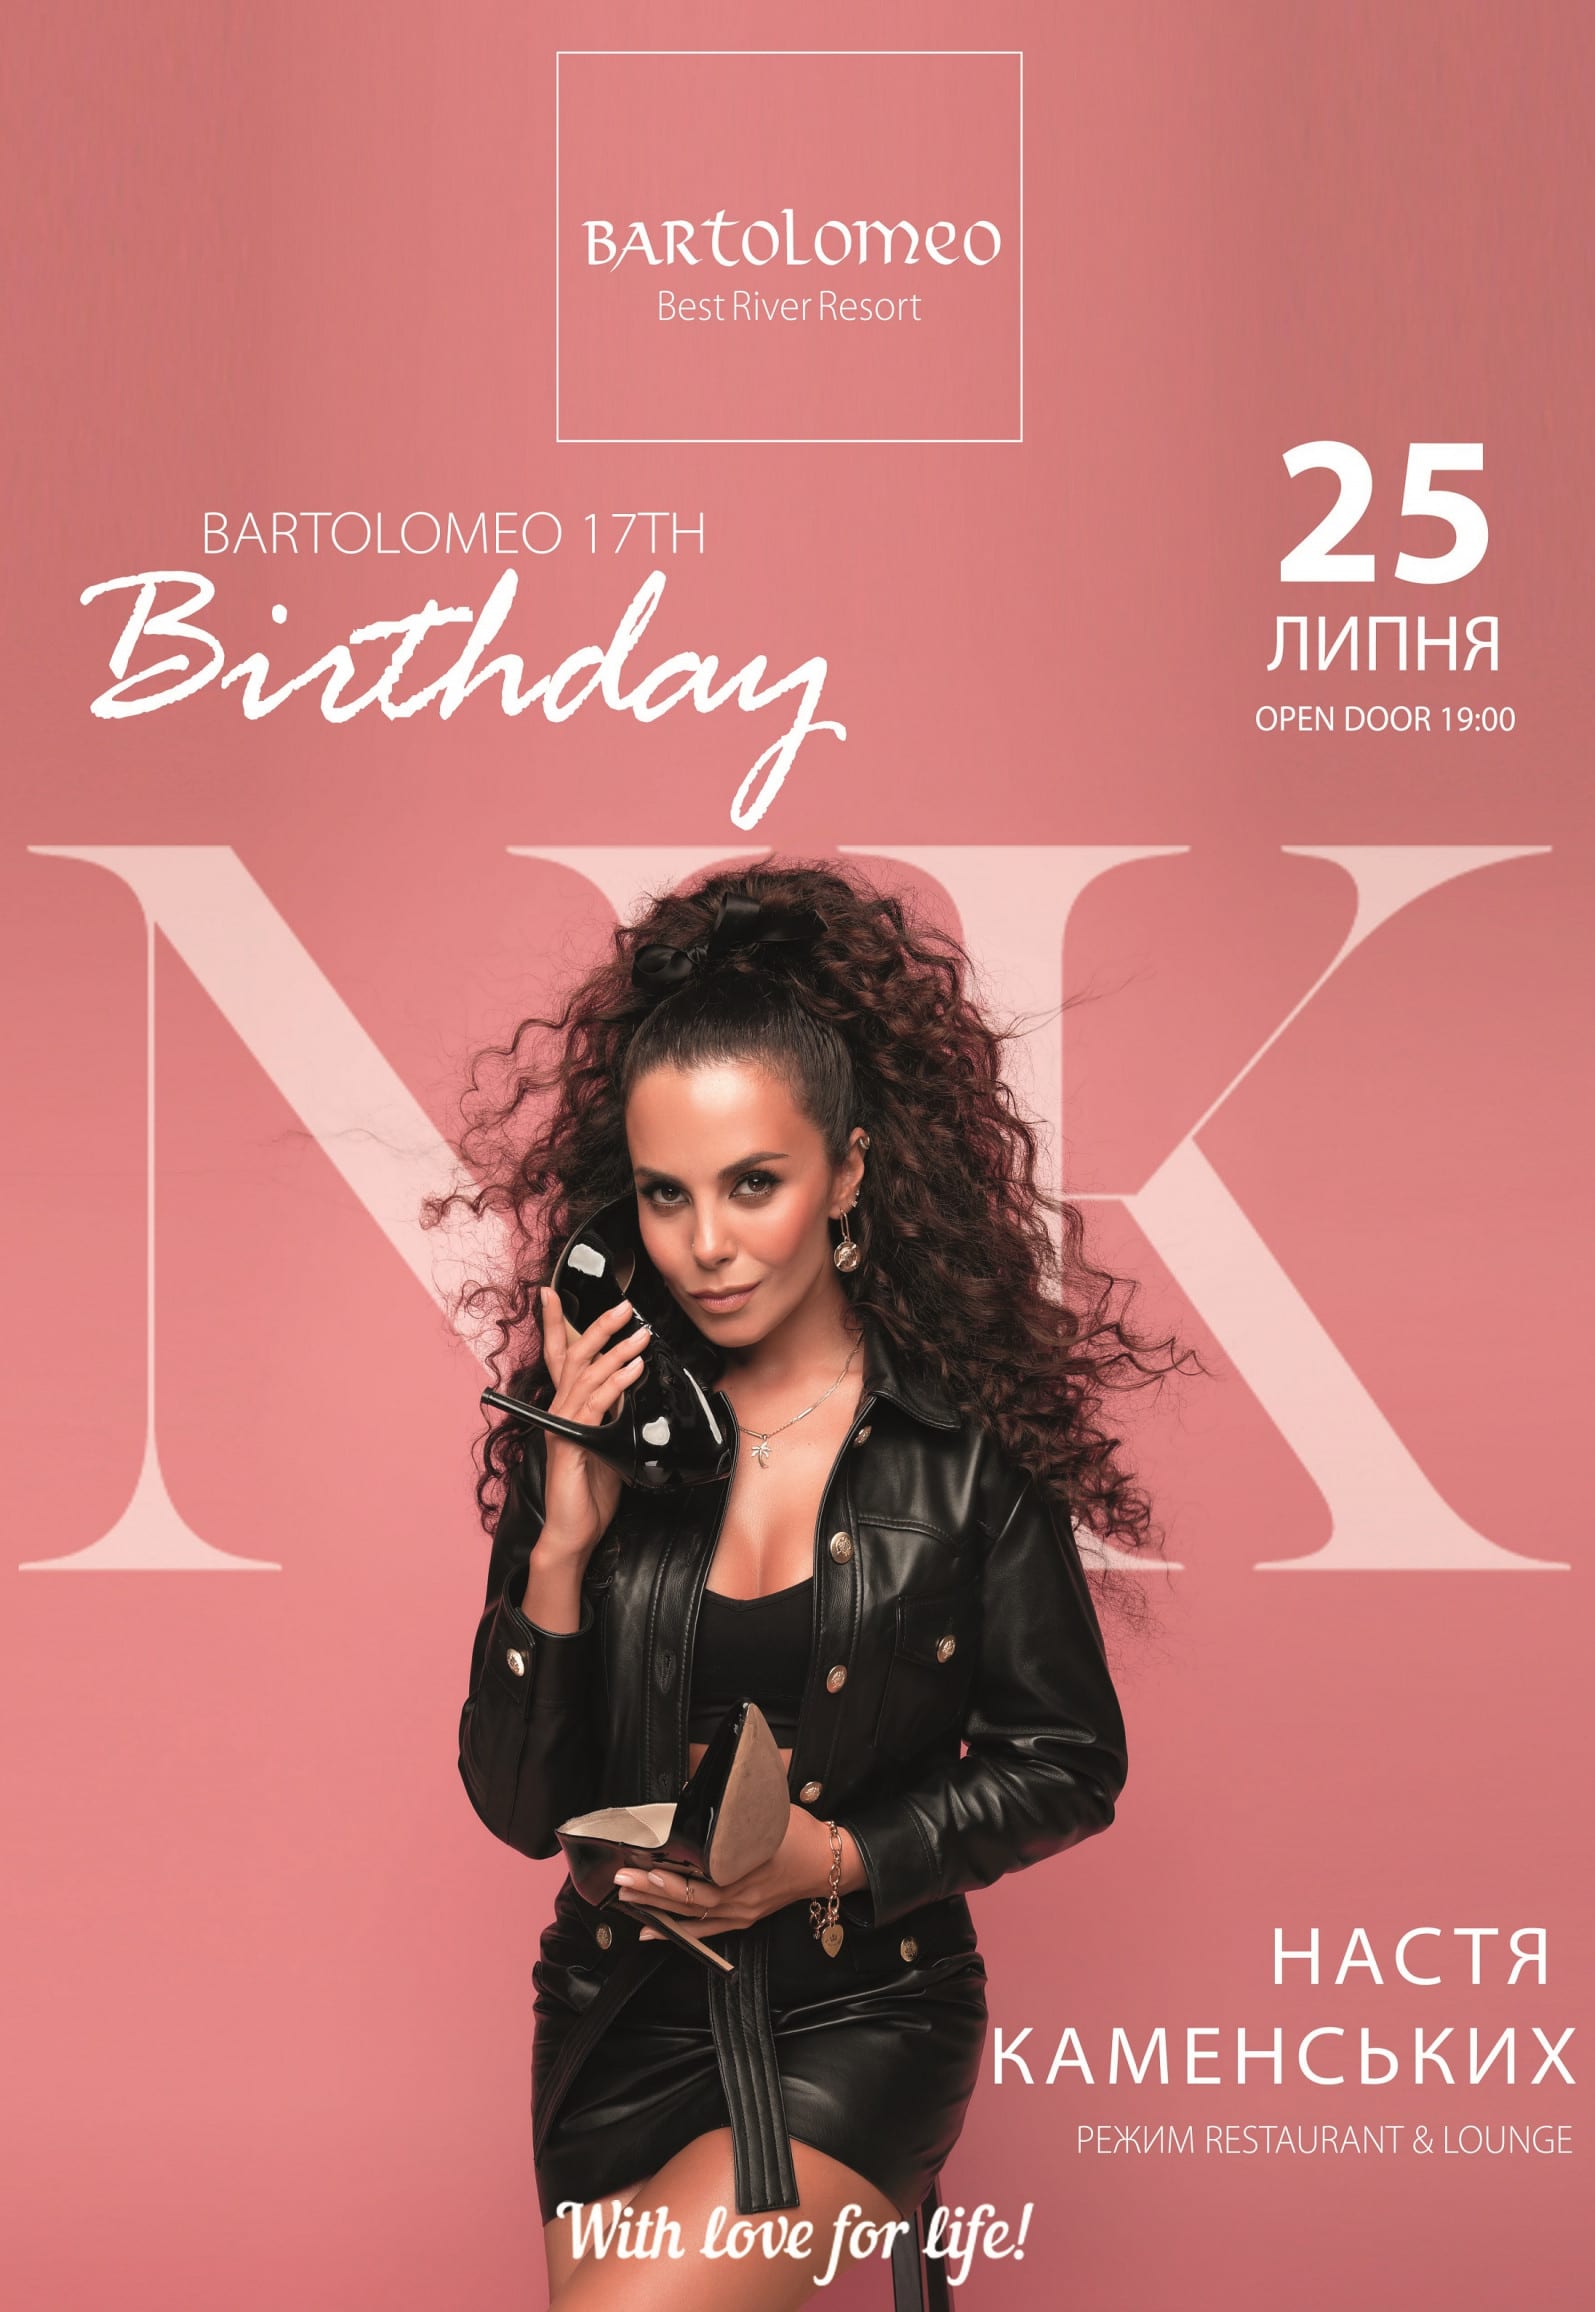 Special guest - NK | Настя Каменских Днепр, 25.07.2020, цена, фото. Афиша Днепра